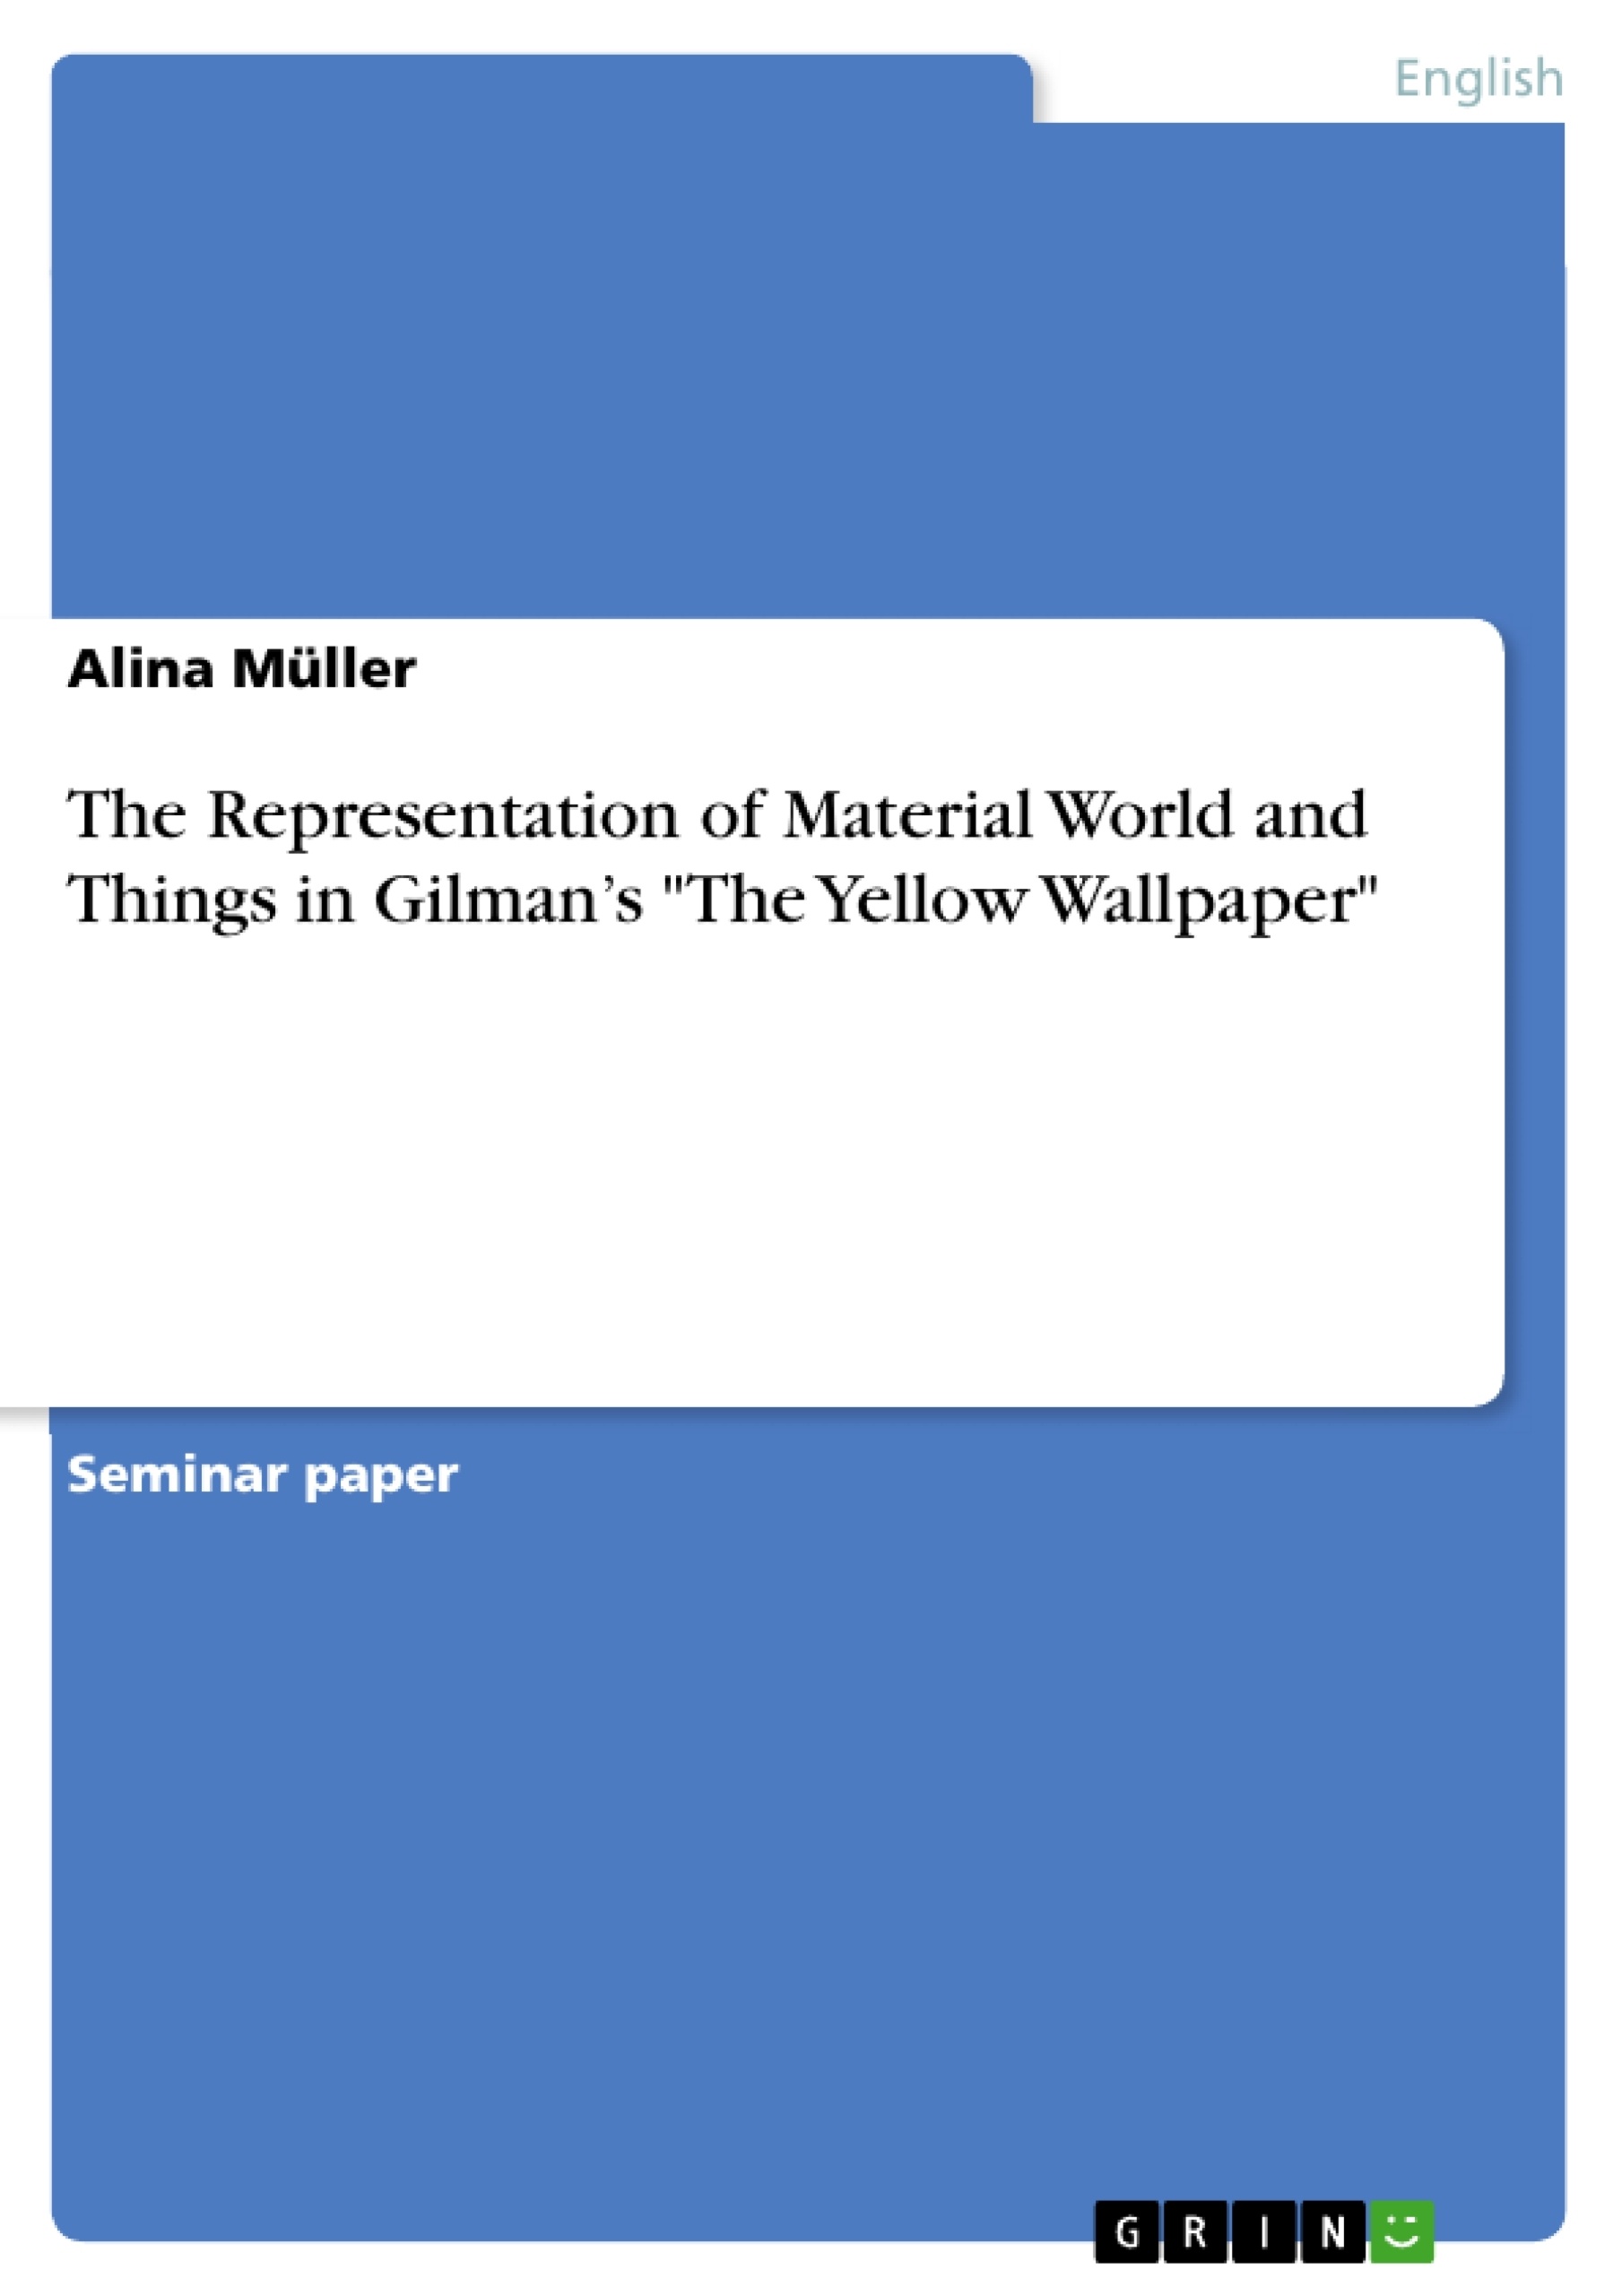 Titel: The Representation of Material World and Things in Gilman’s "The Yellow Wallpaper"